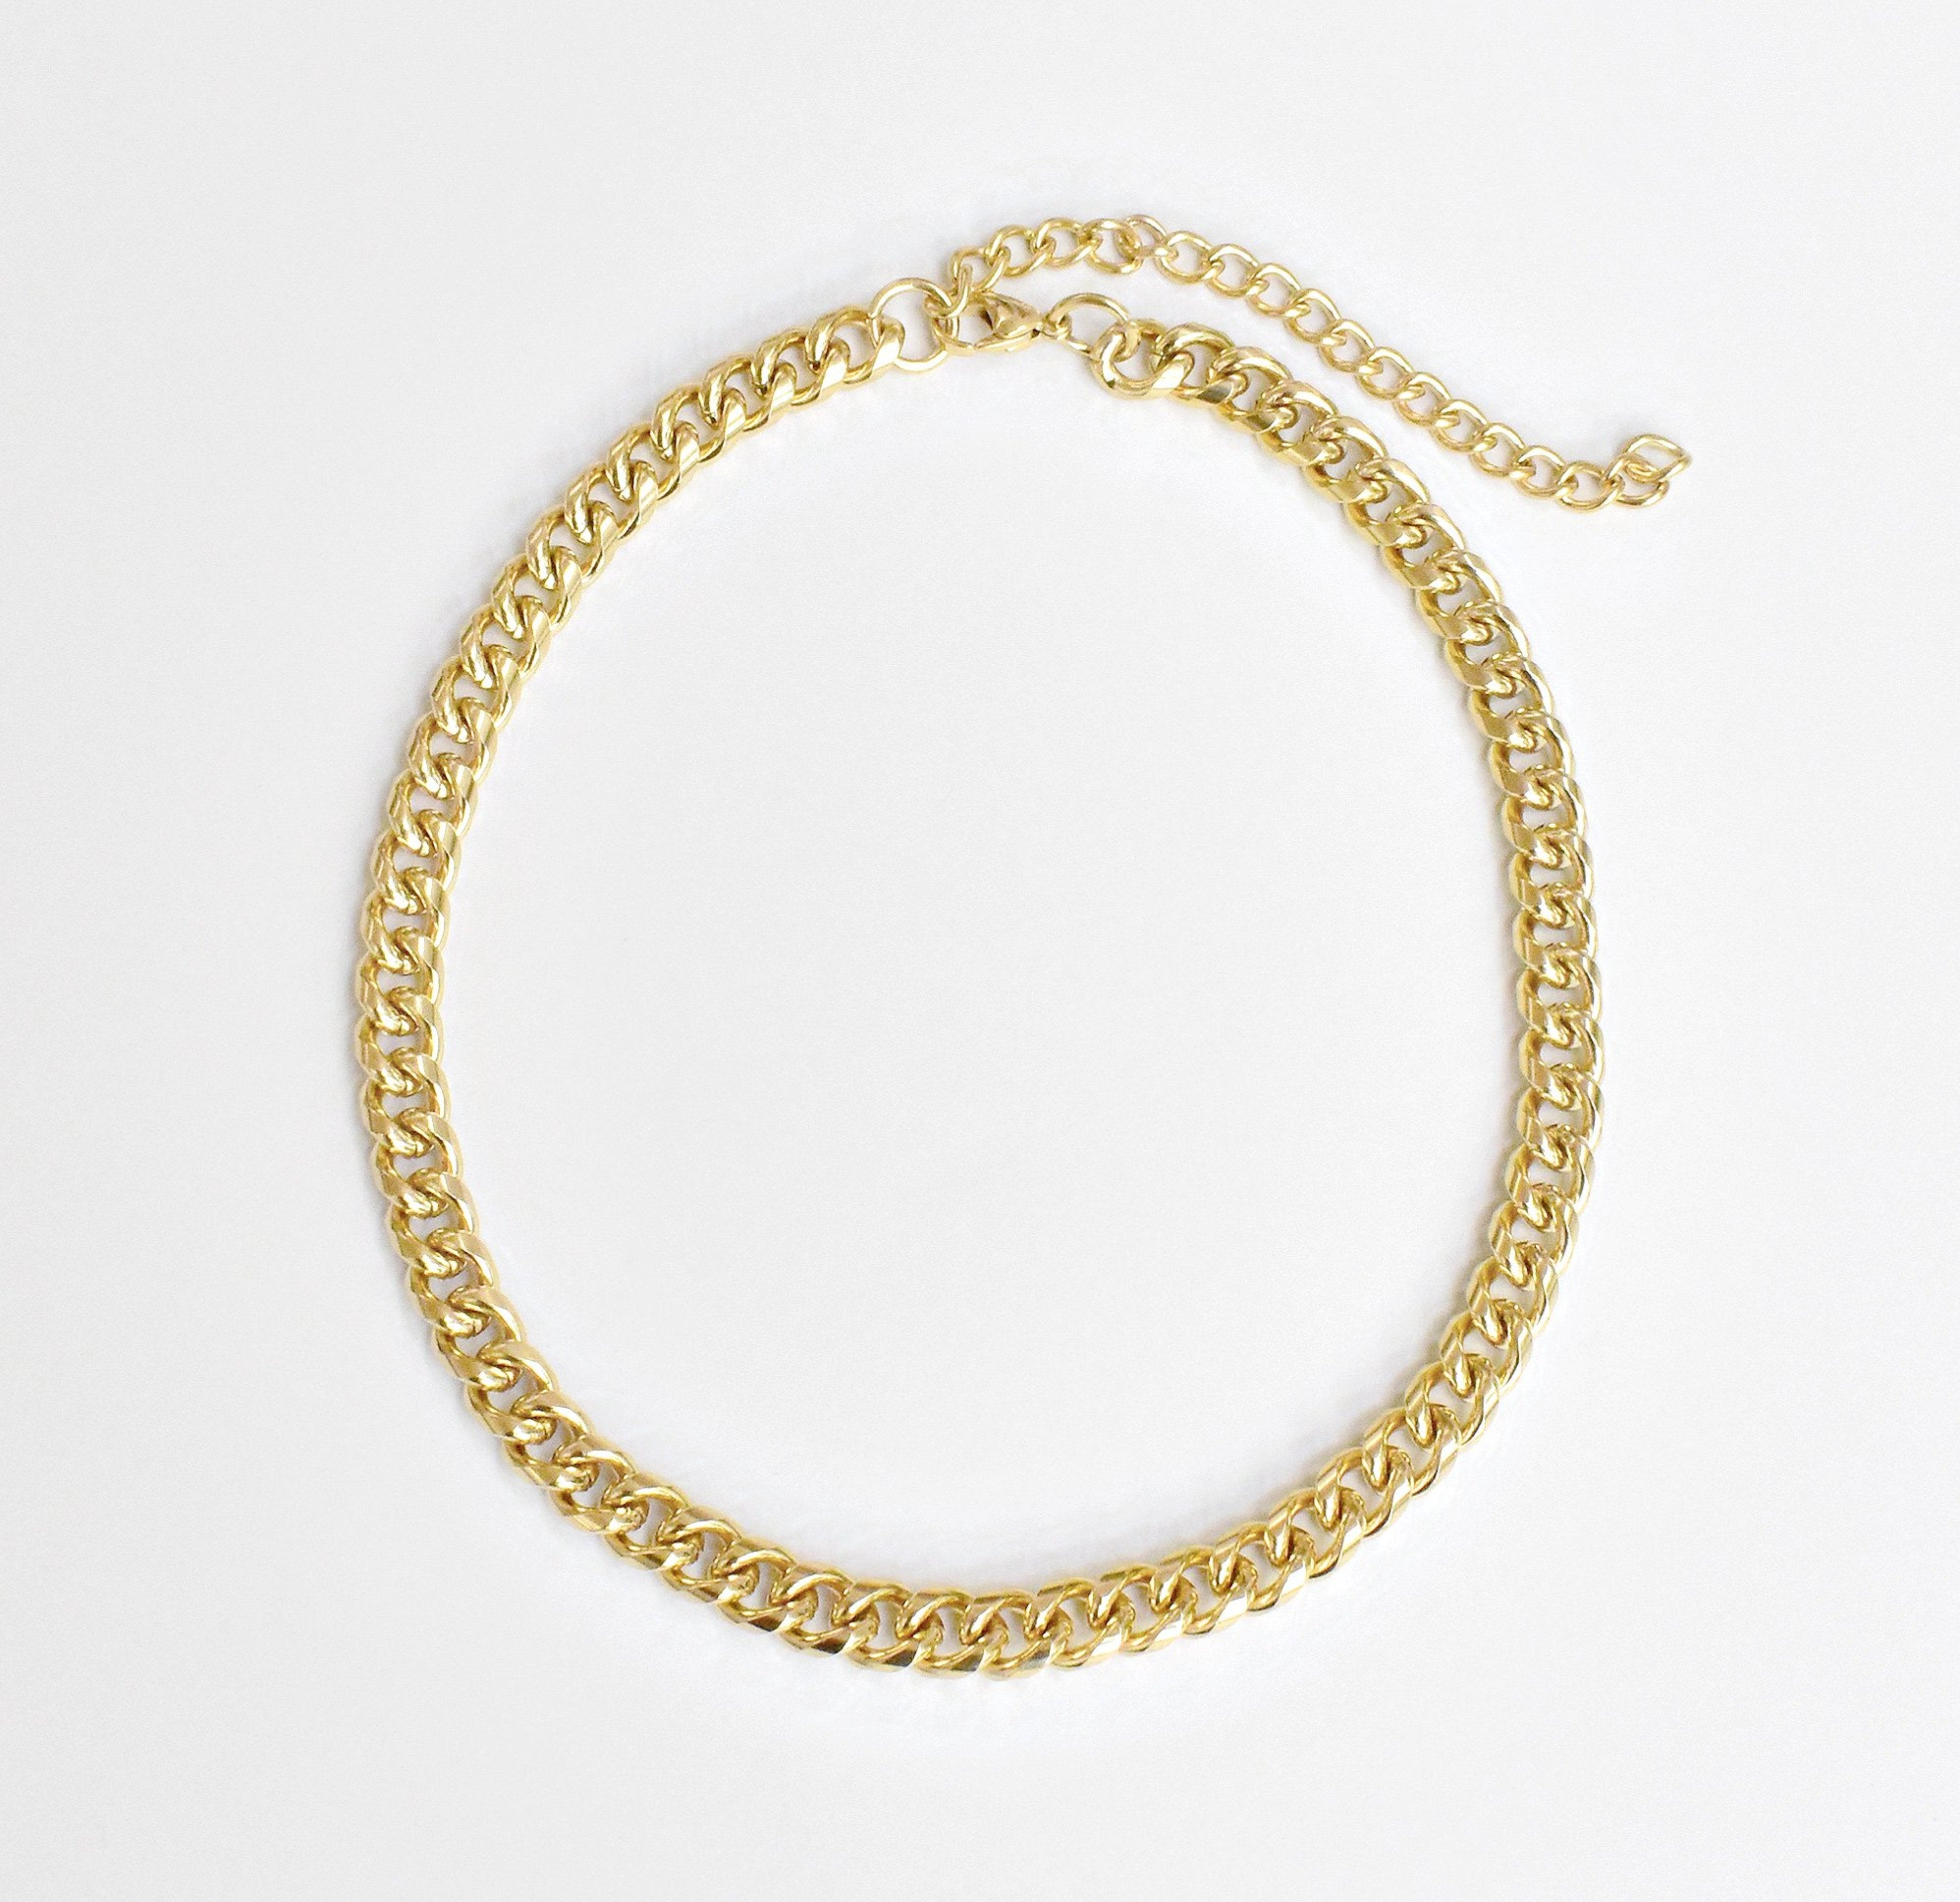 THICK GOLD CHAIN NECKLACE ADJUSTABLE